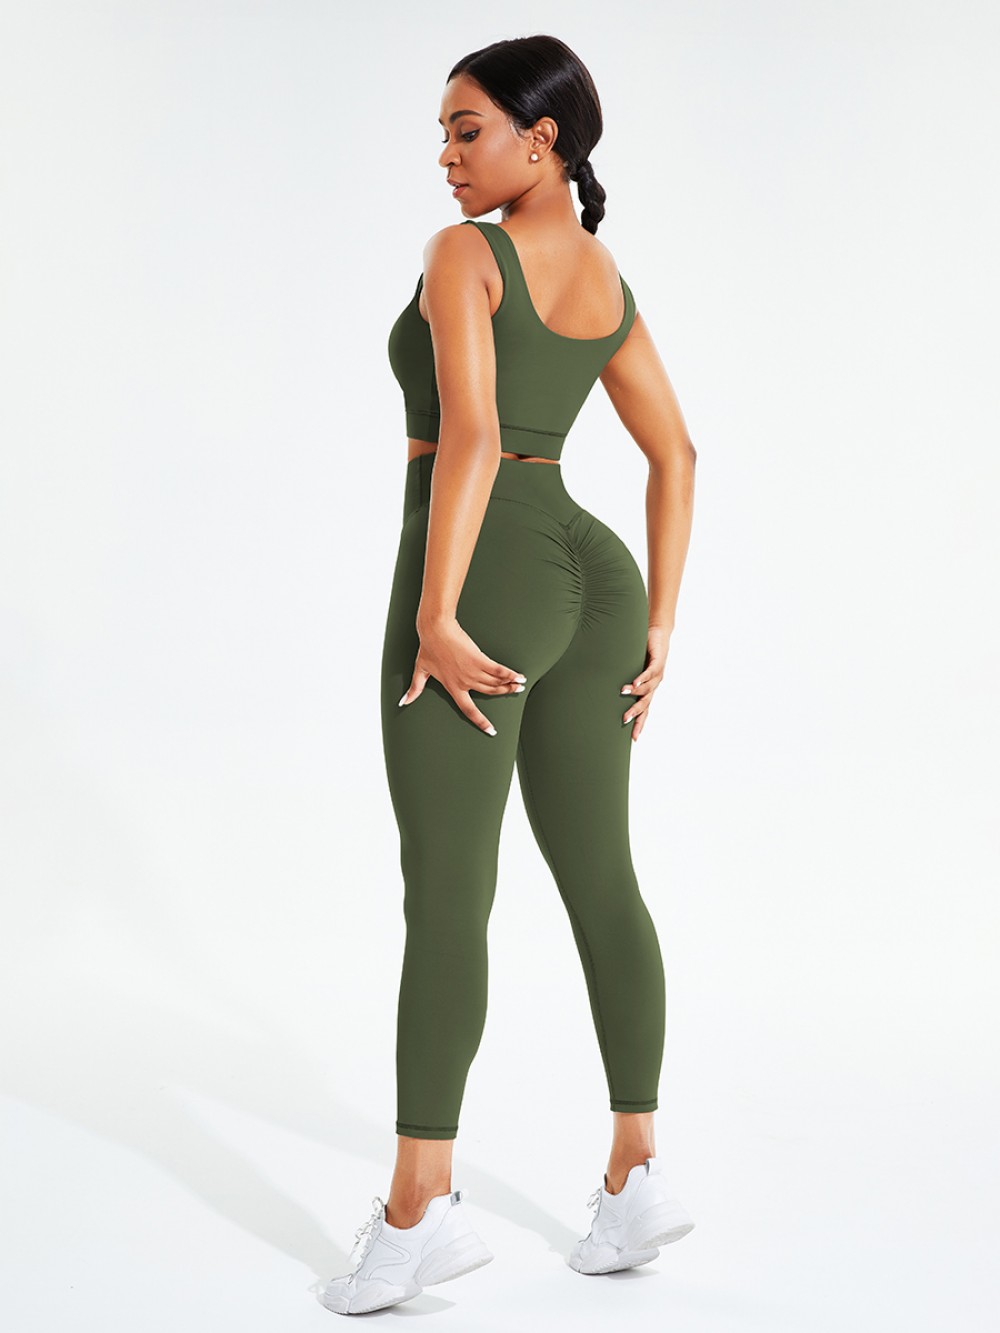 Army Green Hollow Out Full Length Pocket Athletic Suit Comfort